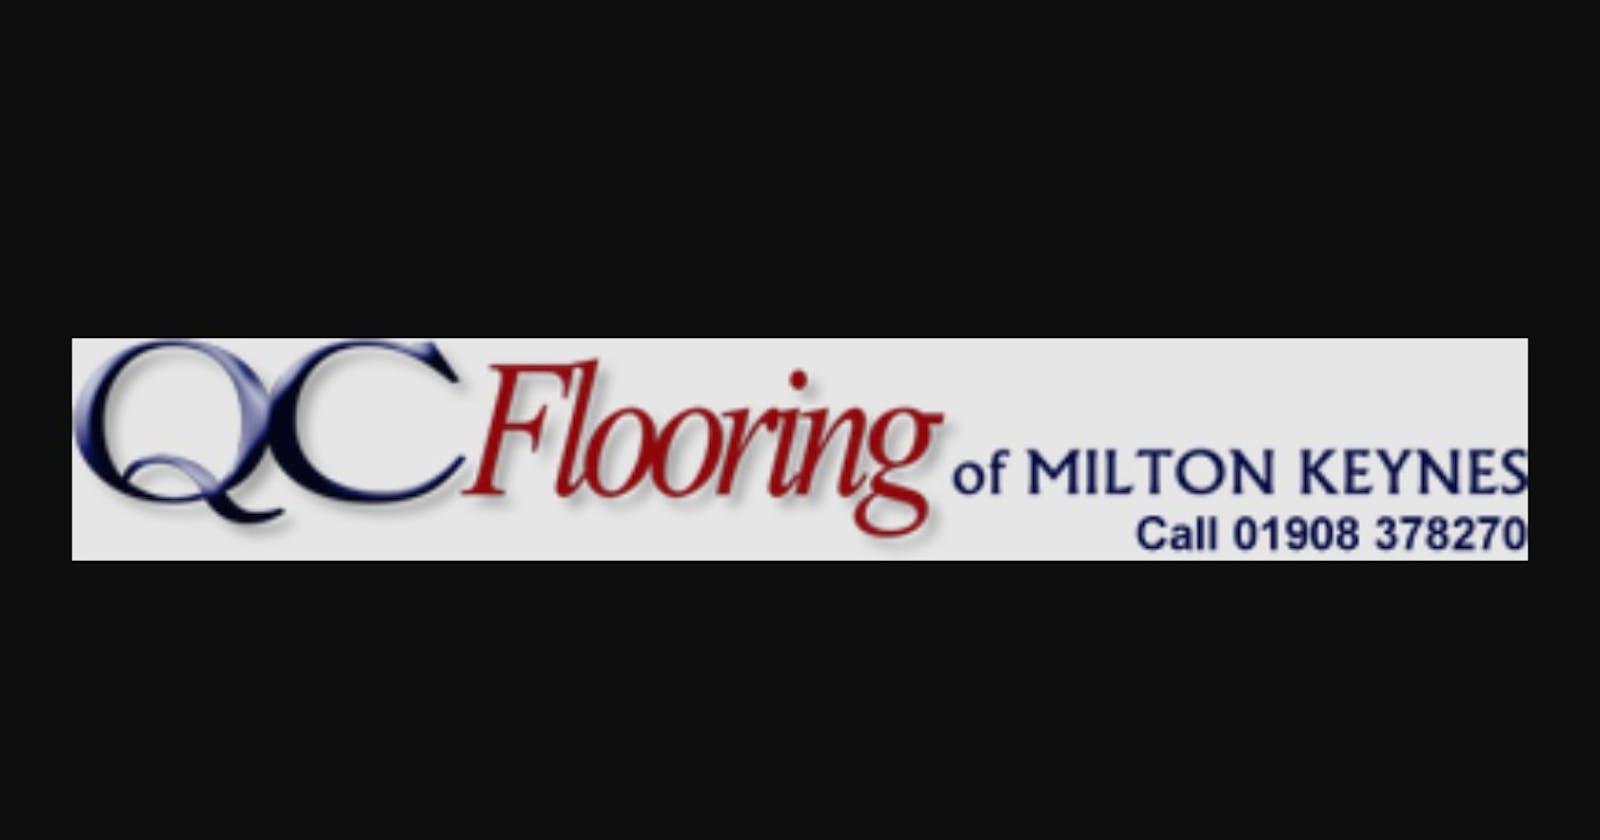 Need to have a Specialist in Deal Flooring?